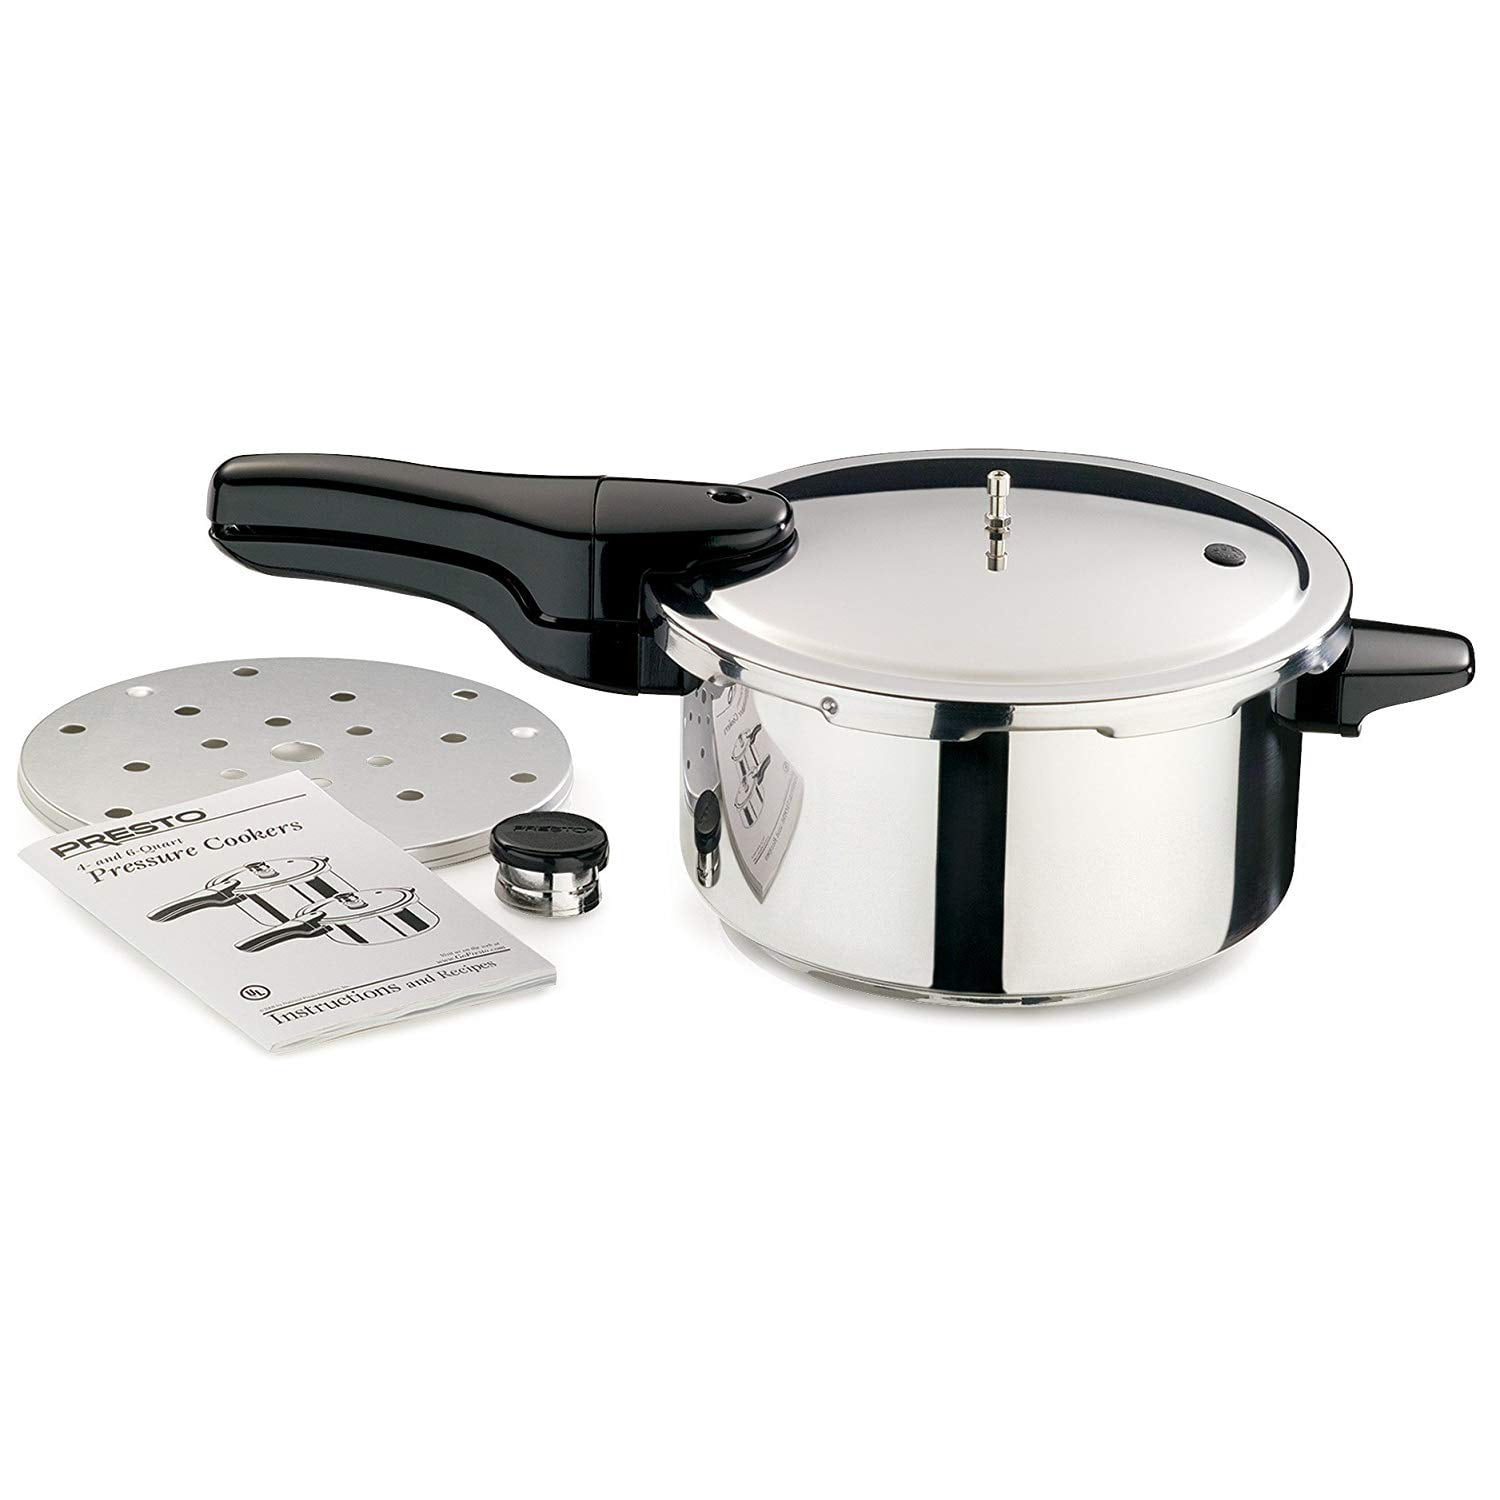 4-Quart Stainless Steel Pressure Cooker by Presto 